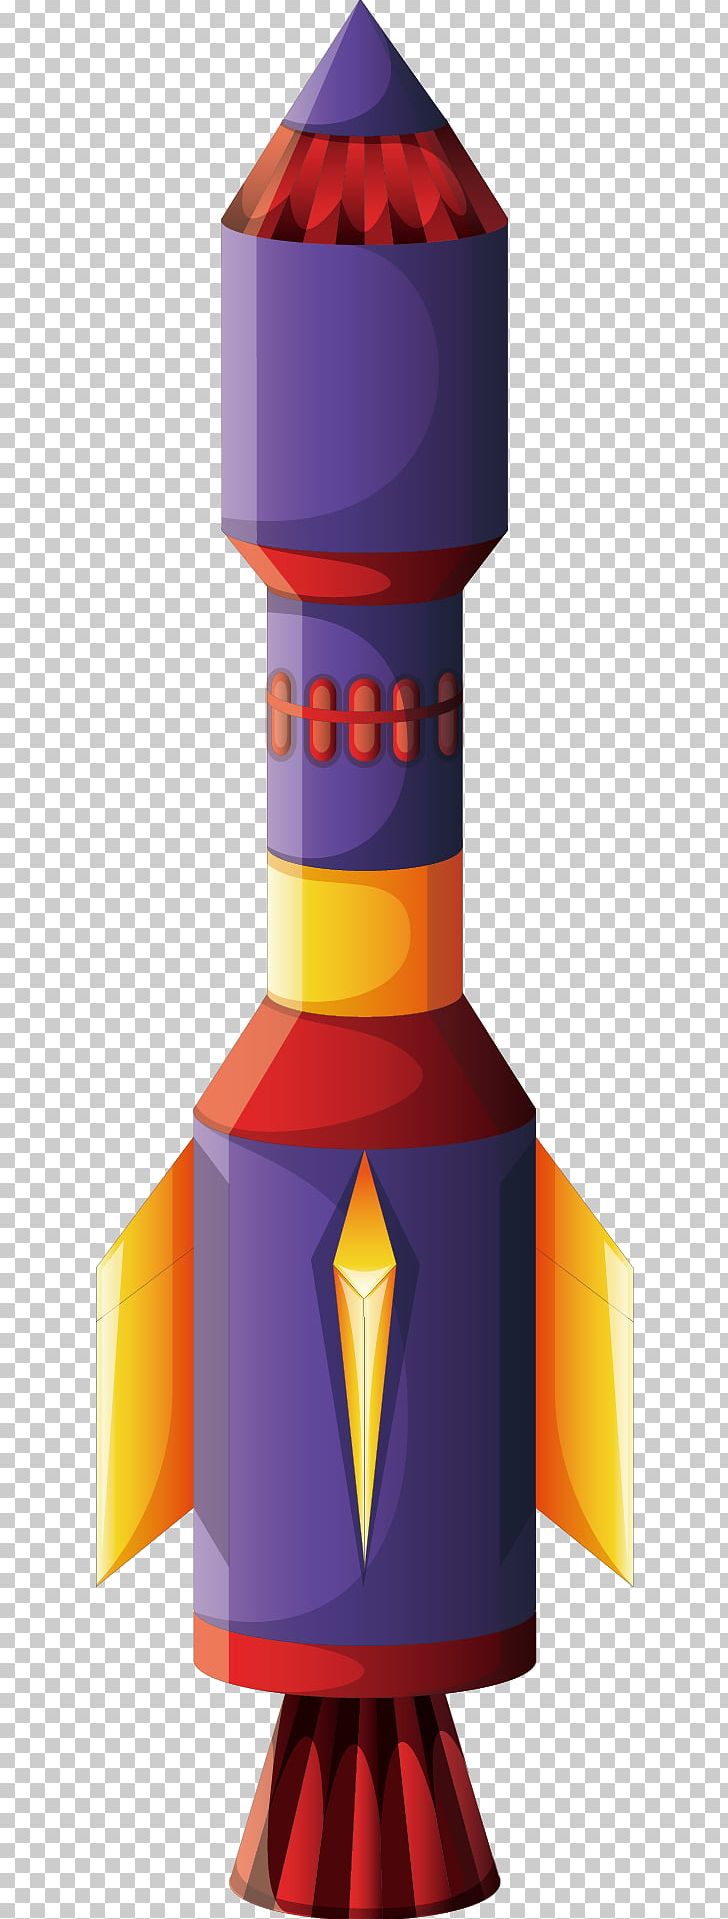 Rocket Spacecraft Illustration PNG, Clipart, Airship, Cartoon, Cartoon Rocket, Cartoon Spaceship, Erecting Vector Free PNG Download